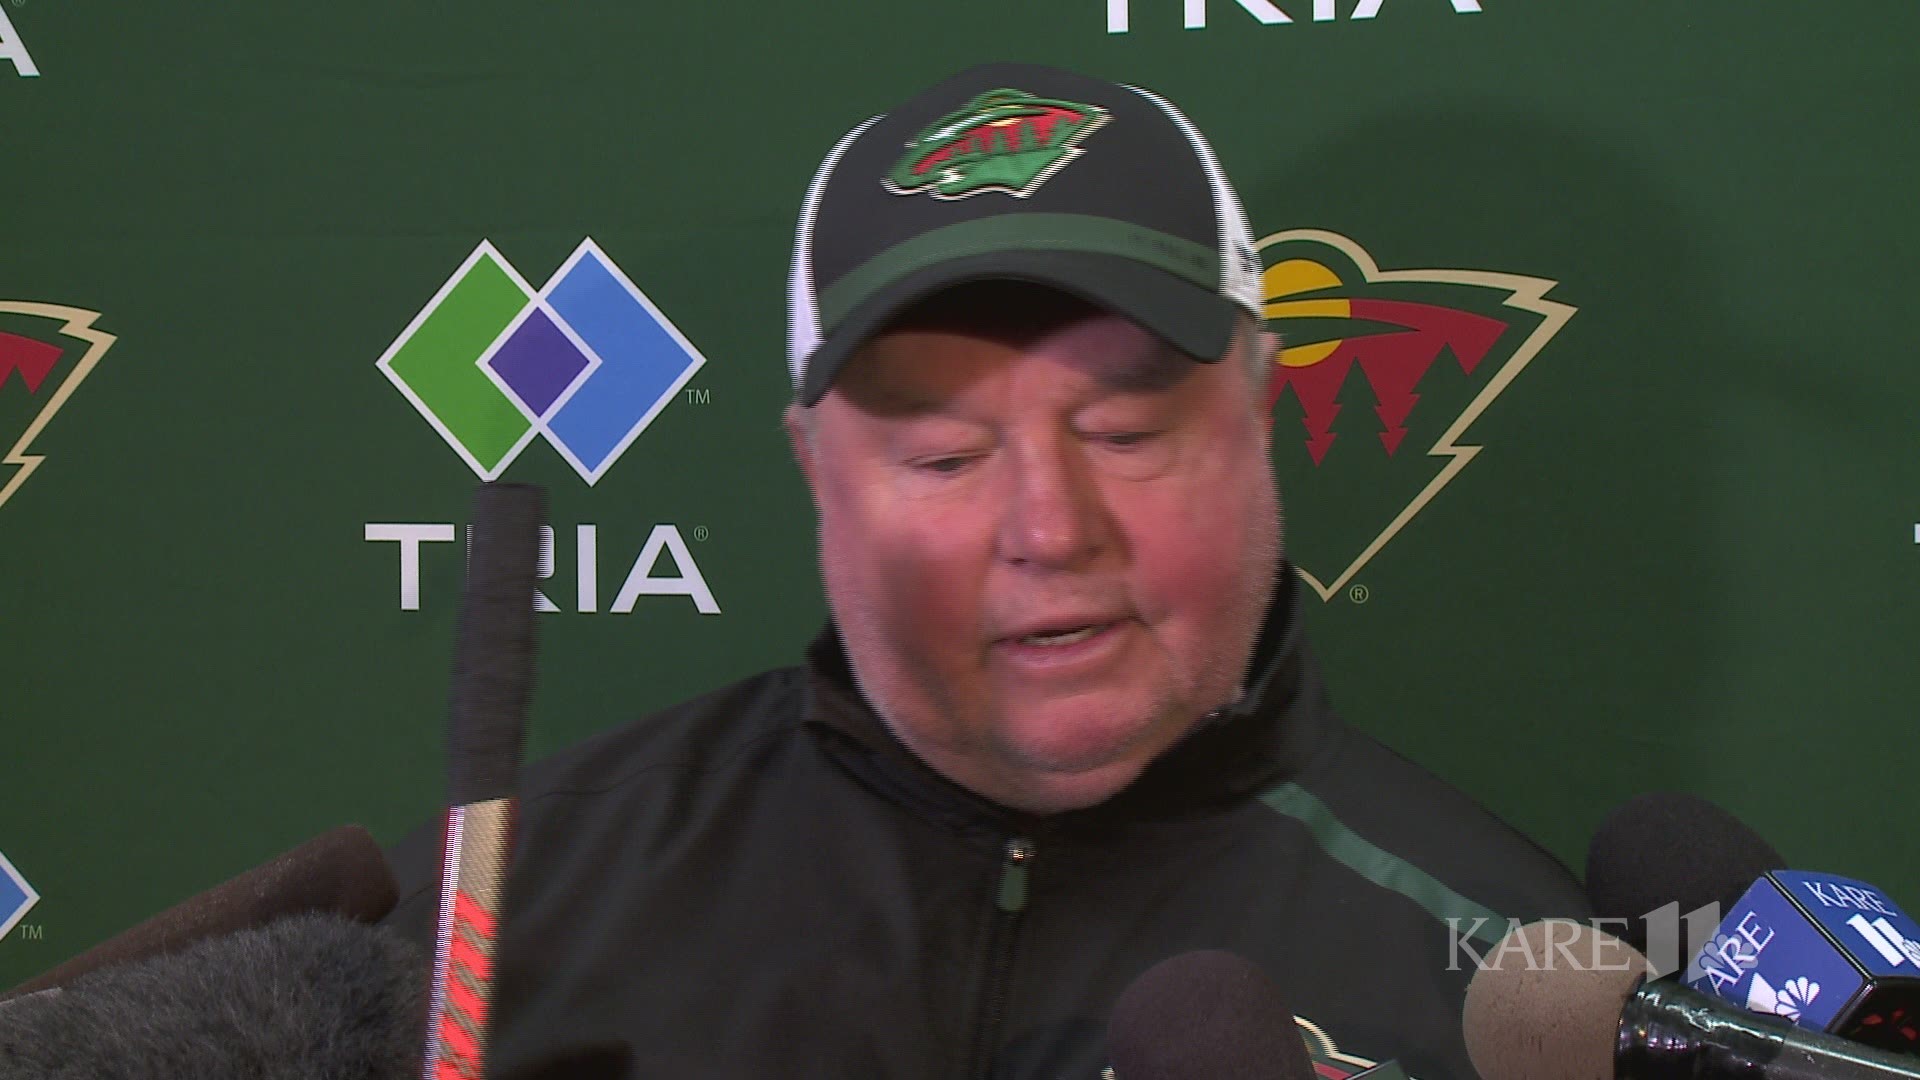 Hear what head coach Bruce Boudrea has to say on the recent struggles for the Wild.